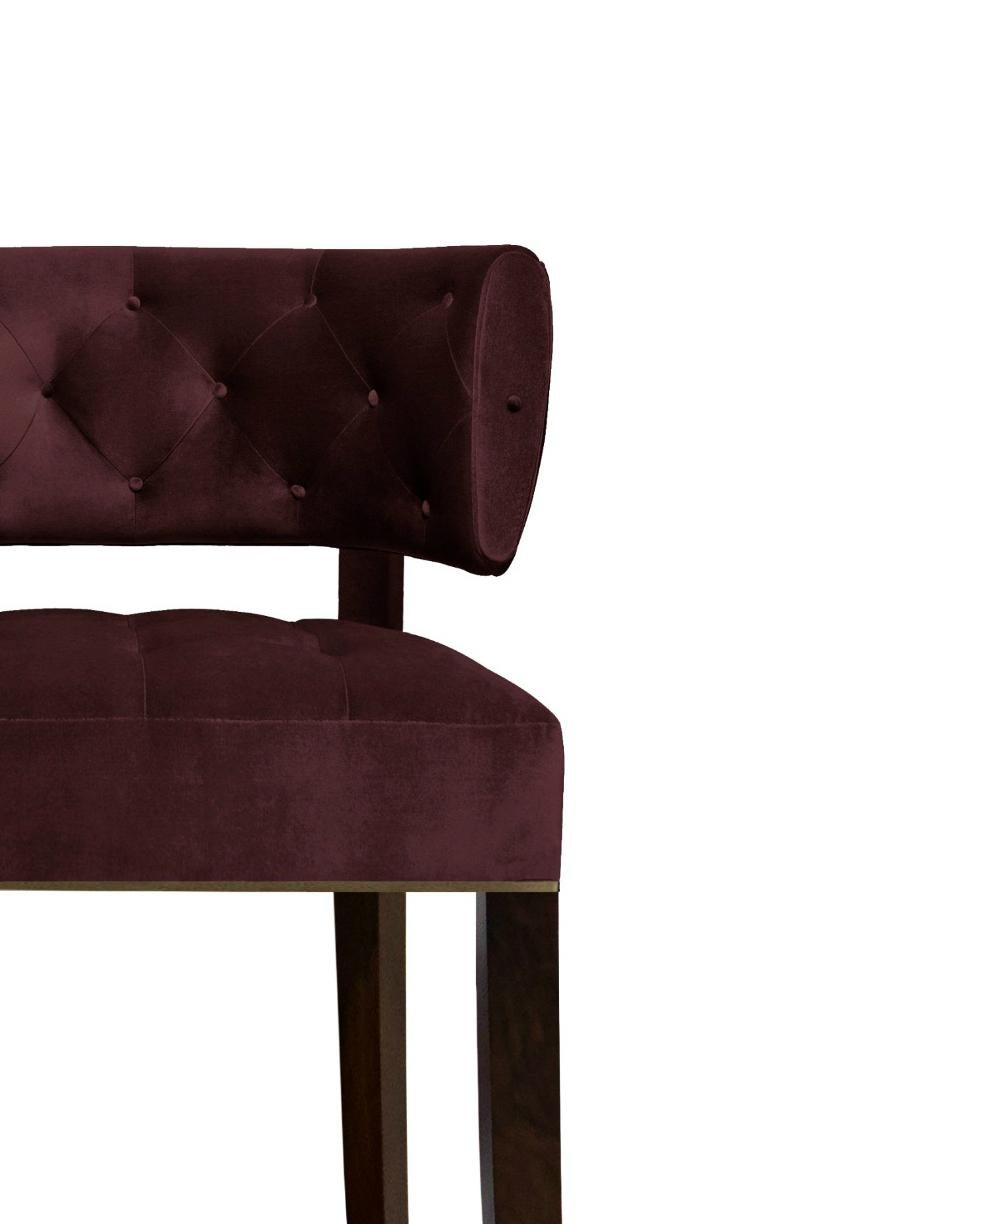 Zulu is the largest ethnic group in South Africa & the one who inspired ZULU Counter Stool. Fully upholstered in cotton velvet, this button tufted stool is full of personality, making it an unforgettable chair design whether the room it is placed